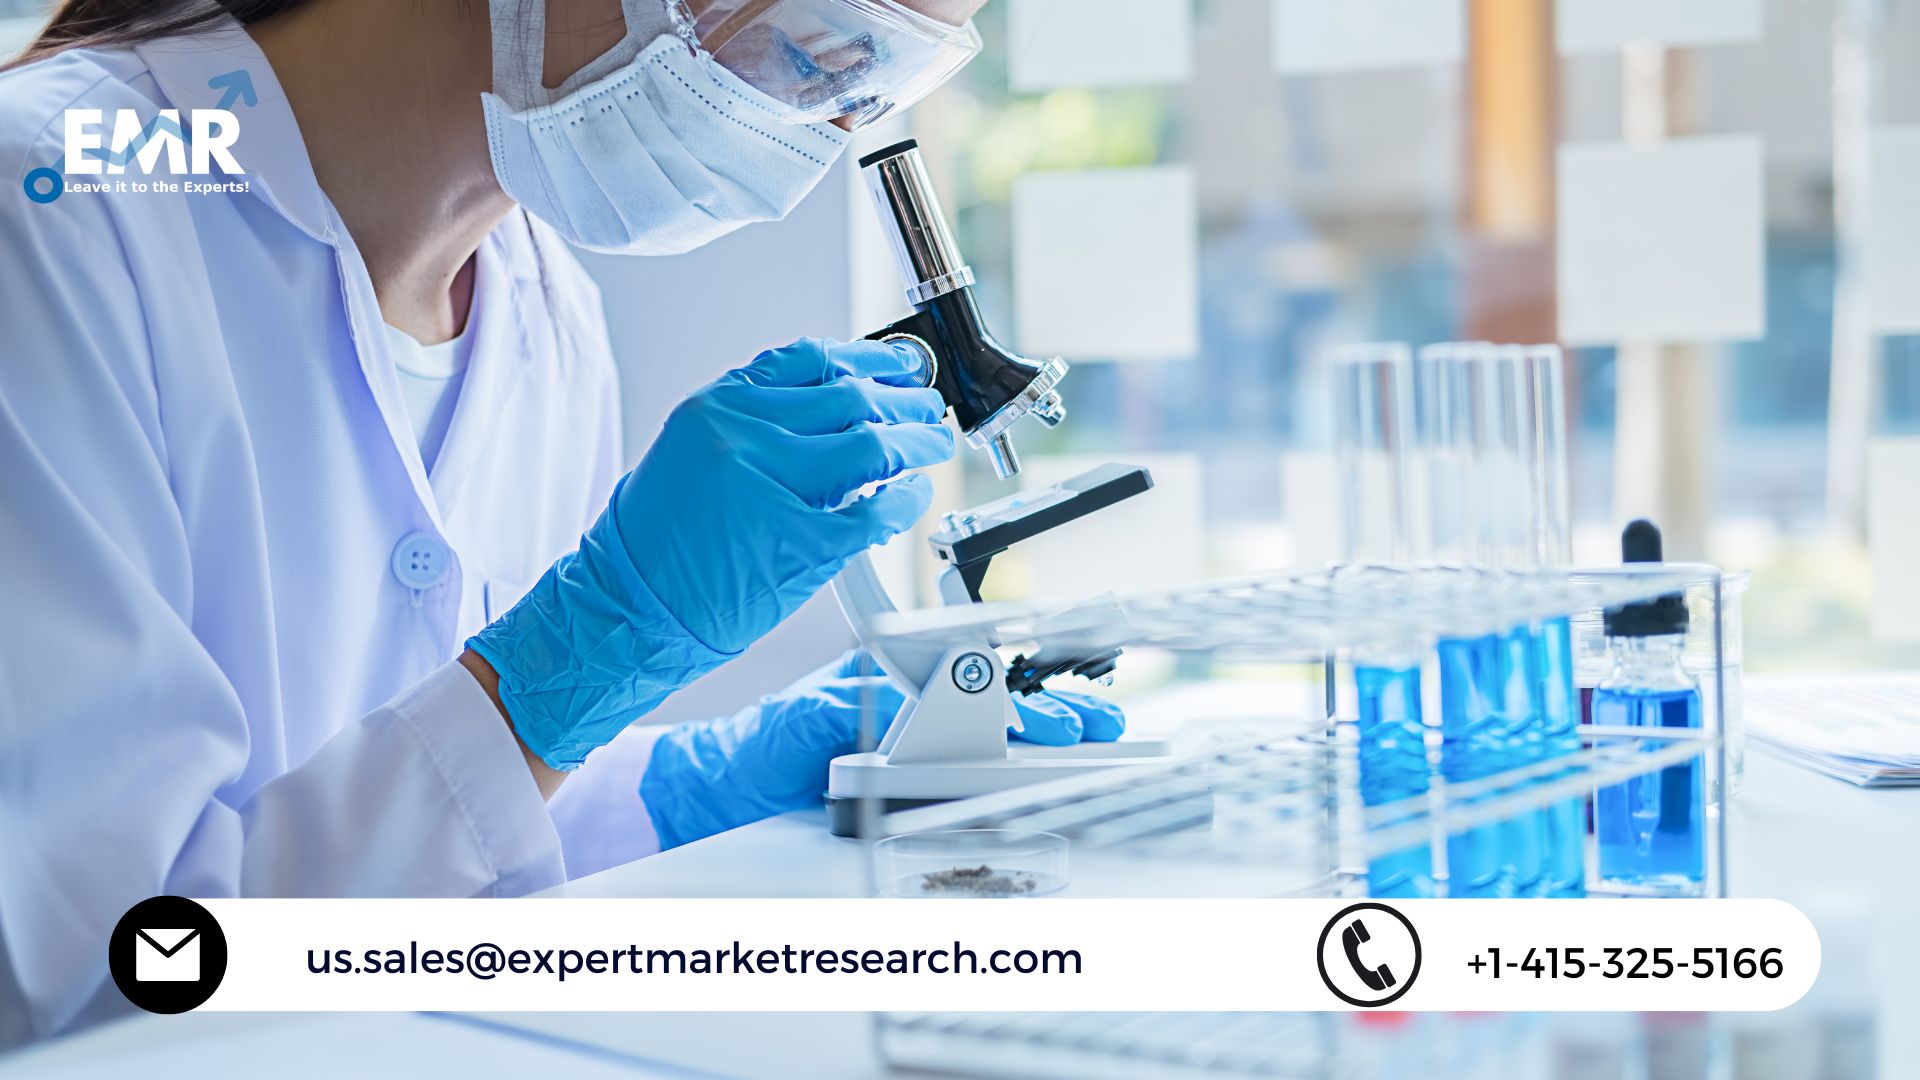 Global Clinical Laboratory Services Market Price, Trends, Growth, Analysis, Key Players, Outlook, Report, Forecast 2022-2027 | EMR Inc.